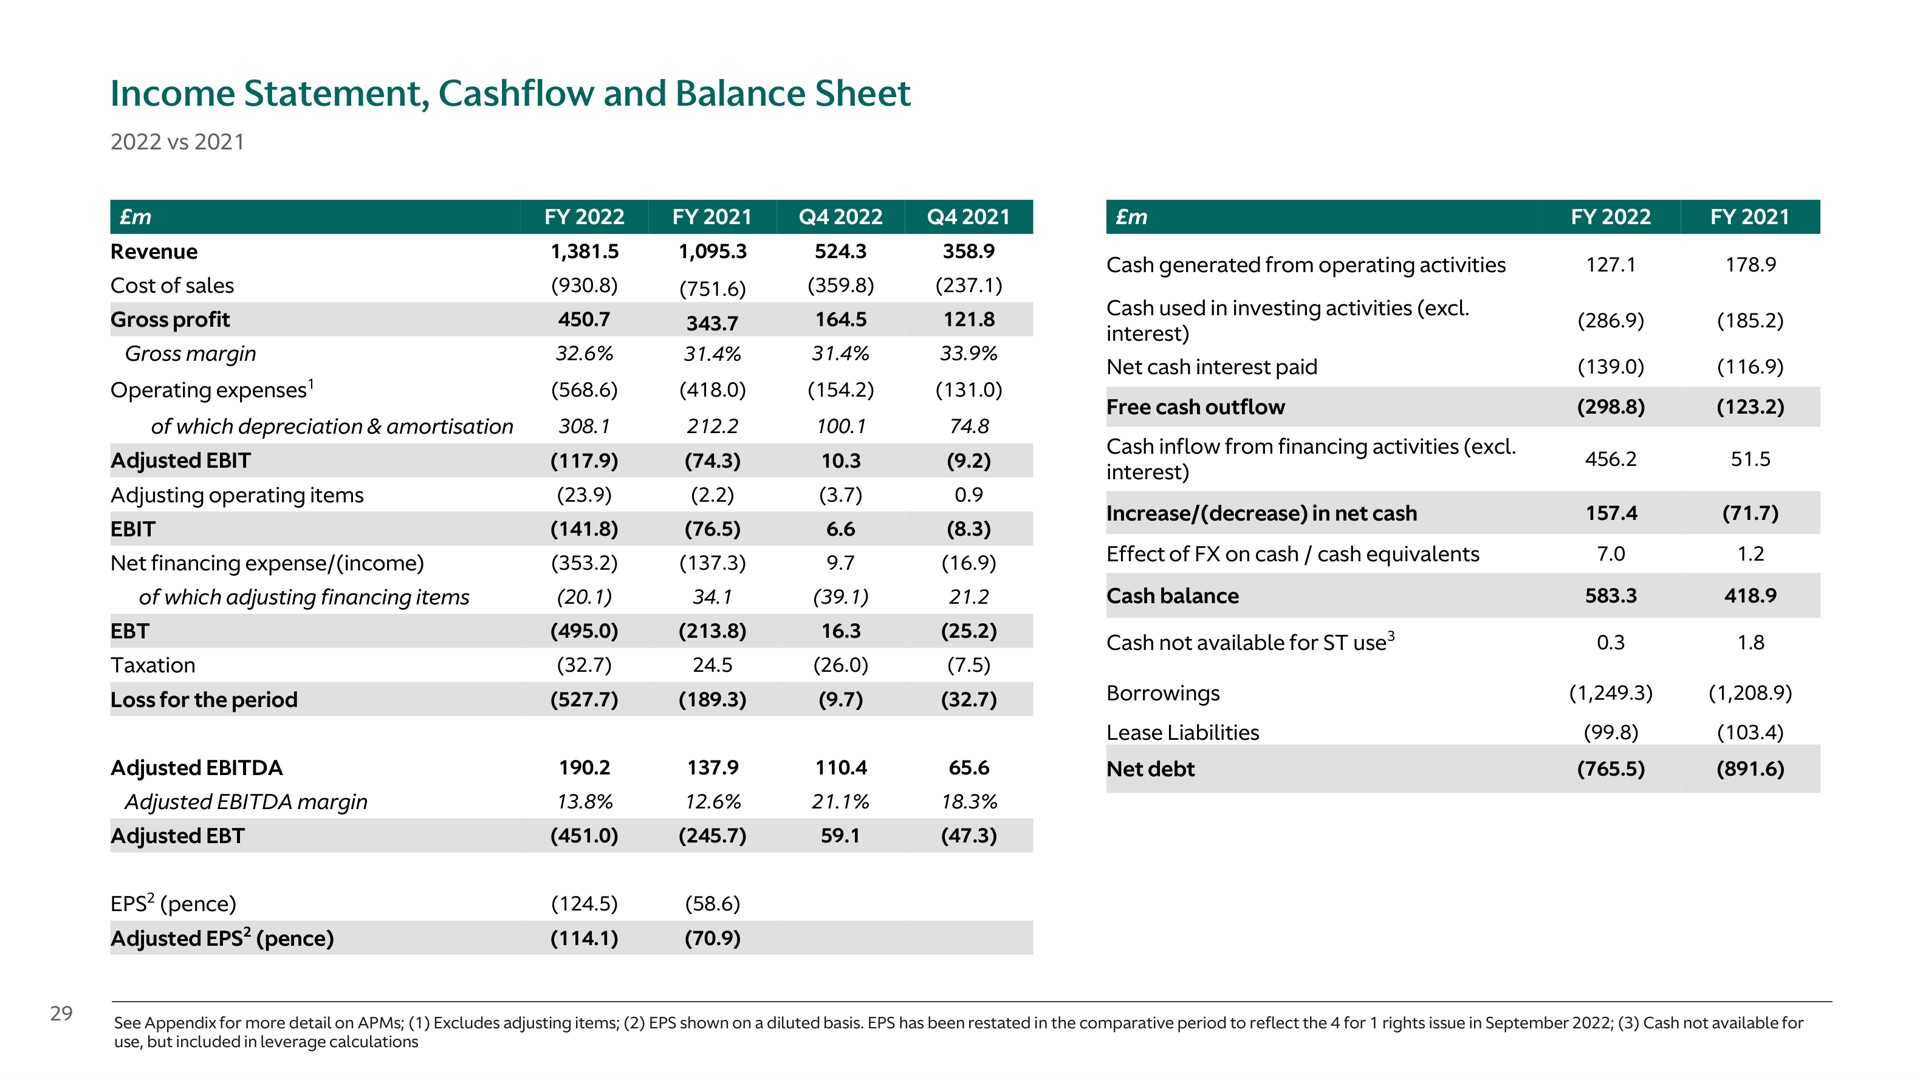 income statement and balance sheet gross profit adjusted loss for the period adjusted adjusted pence in investing activities rest borrowings net debt | Aston Martin Lagonda